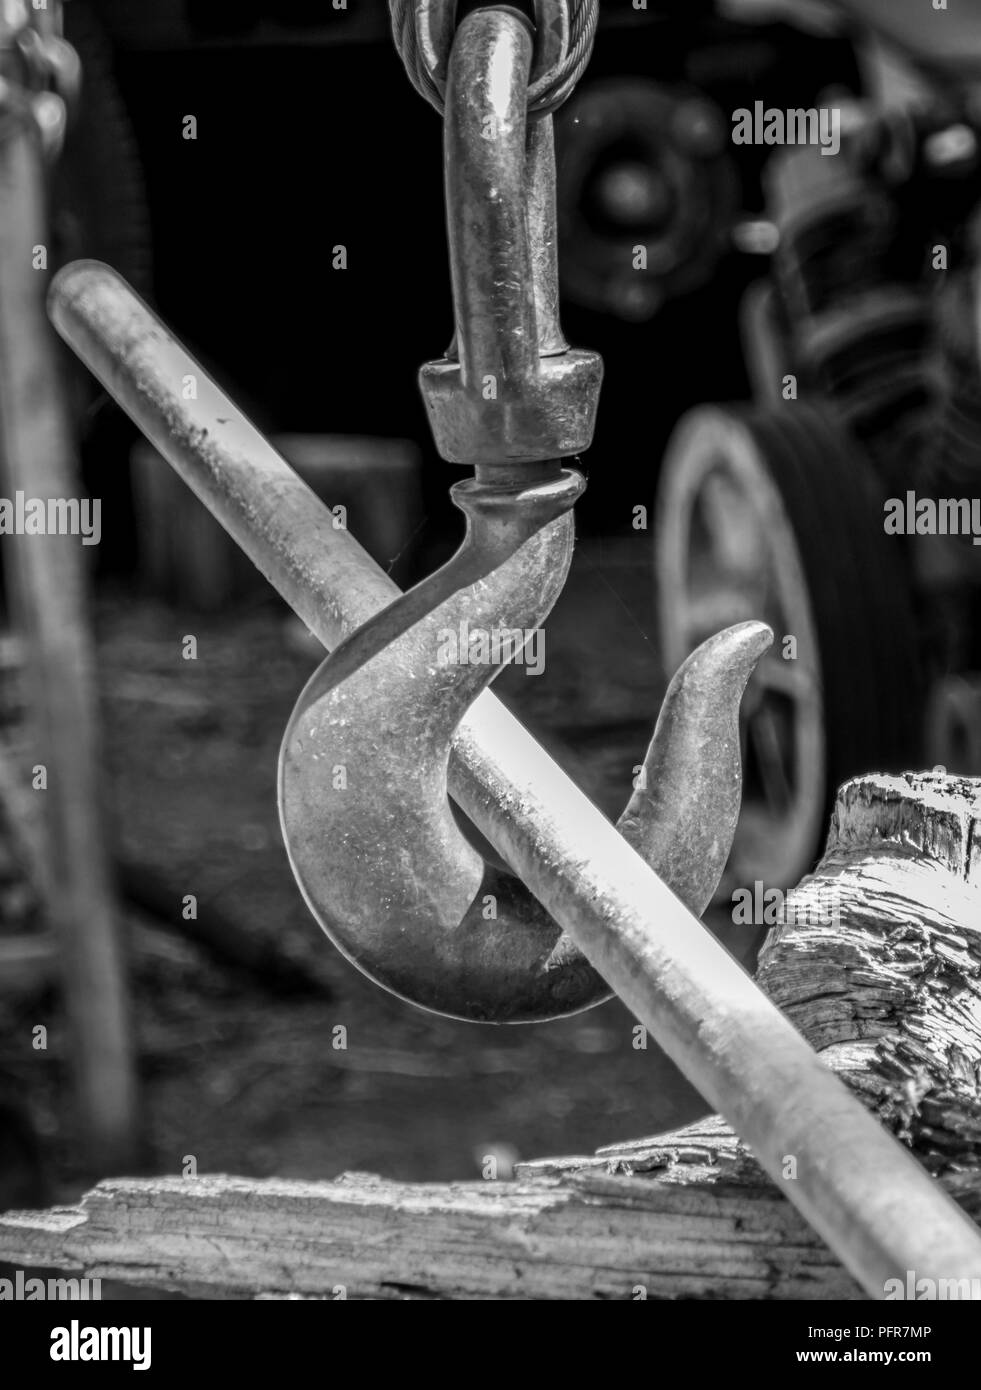 Black & white image of an industrial hook with a lead pipe through the hook Stock Photo